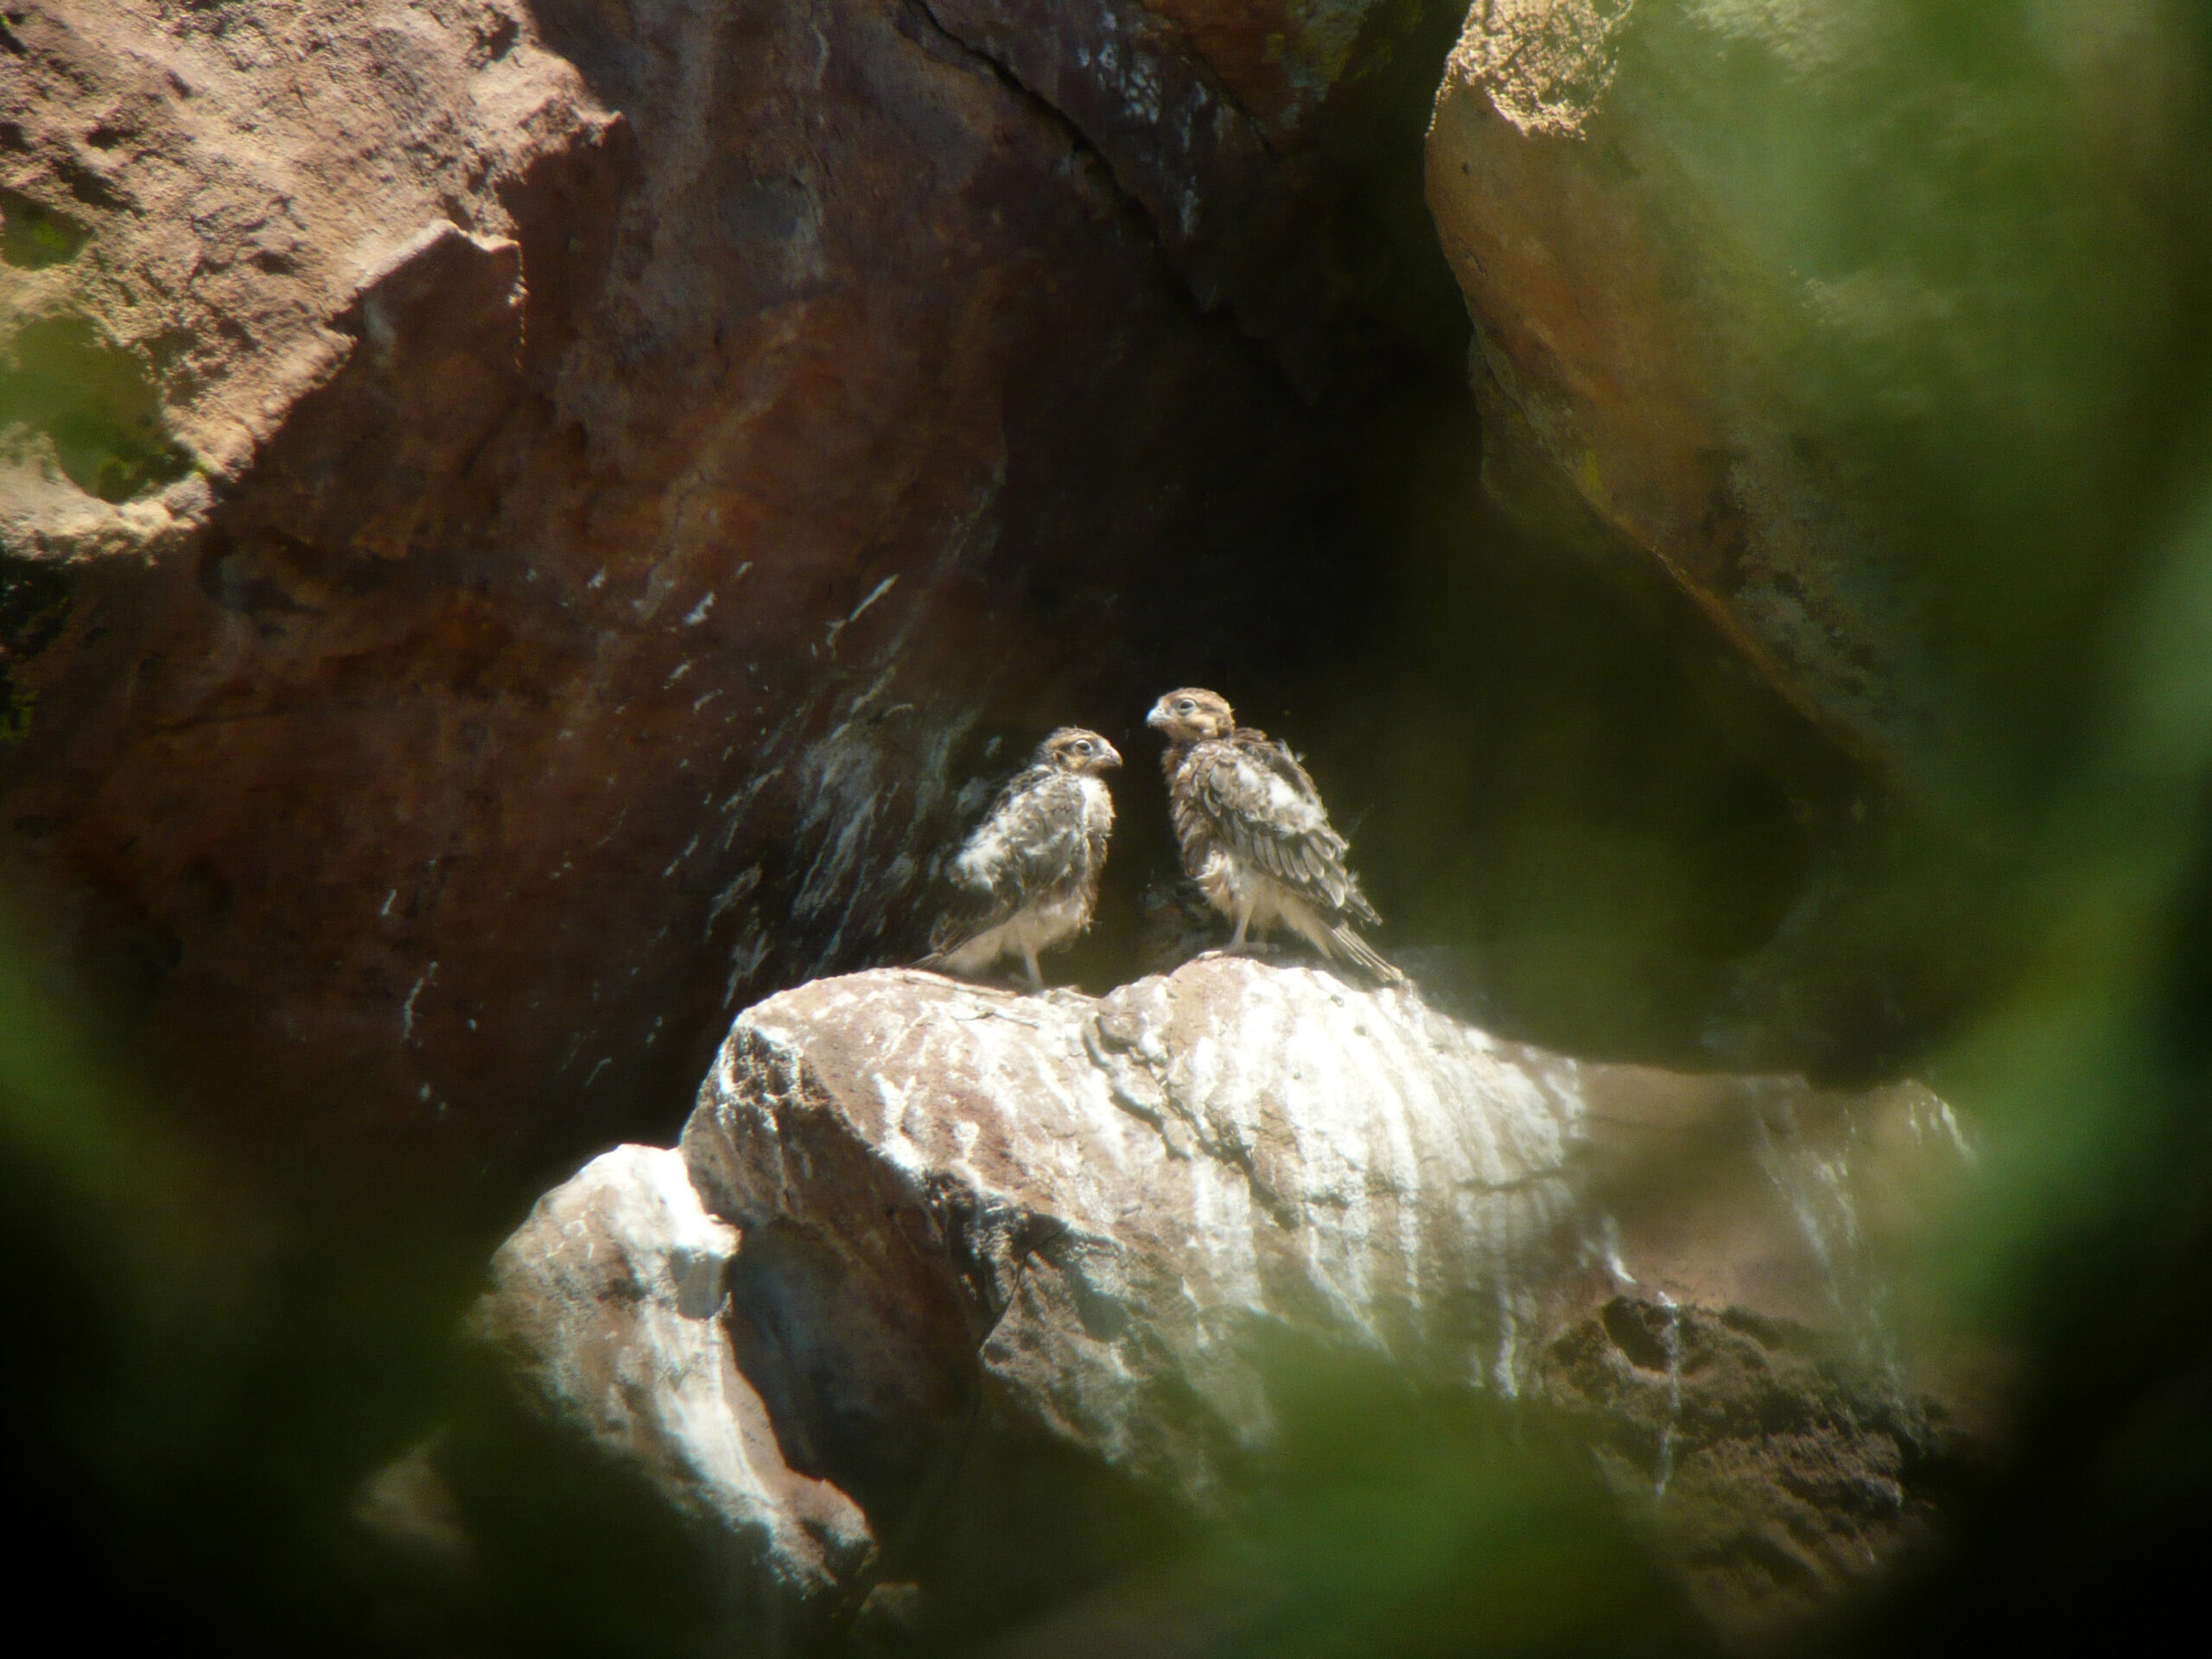 Record number of falcons fledged in Boulder’s Flatirons last year